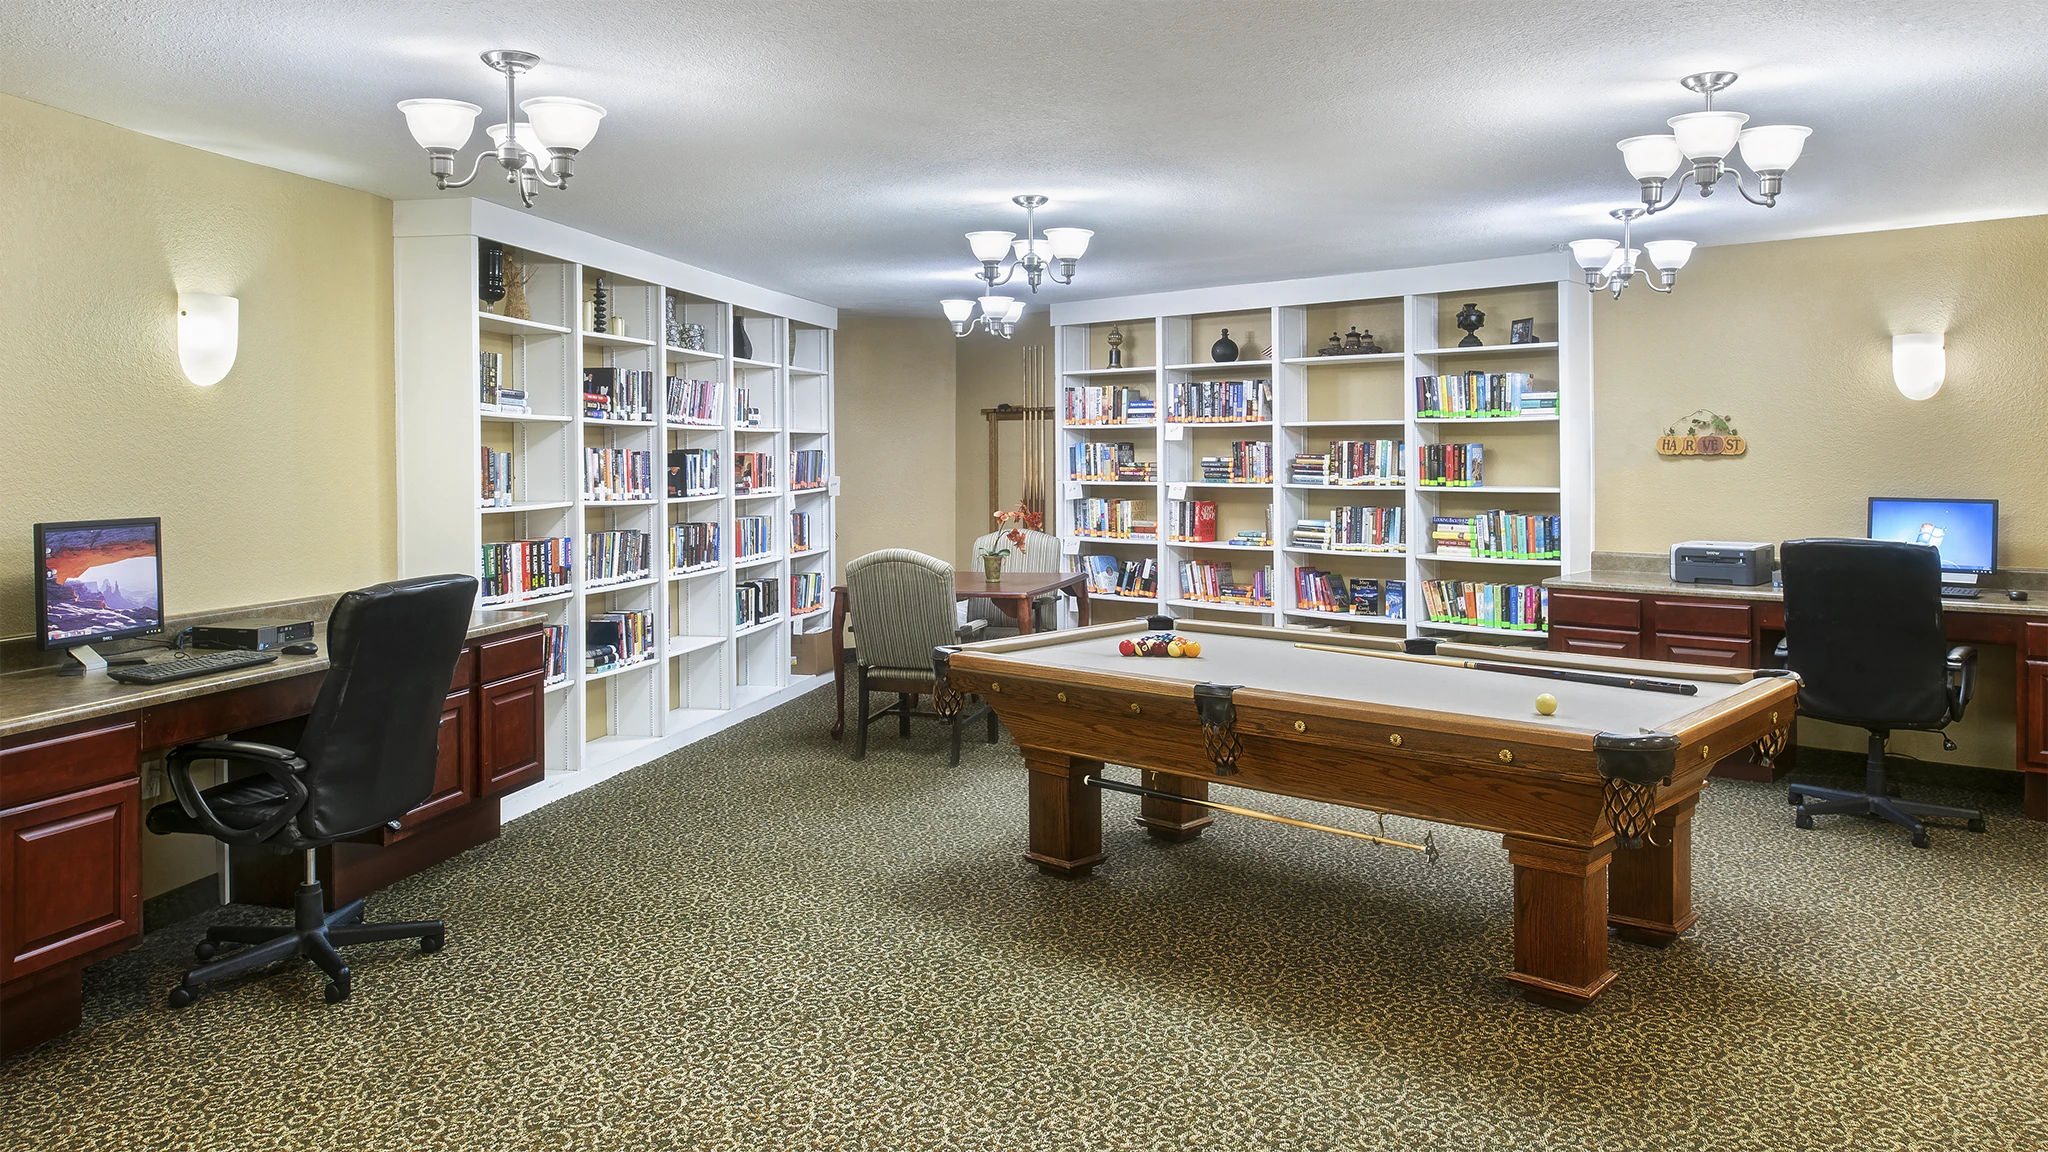 Billiards and game room at American House Milford, a senior community in Oakland County, MI